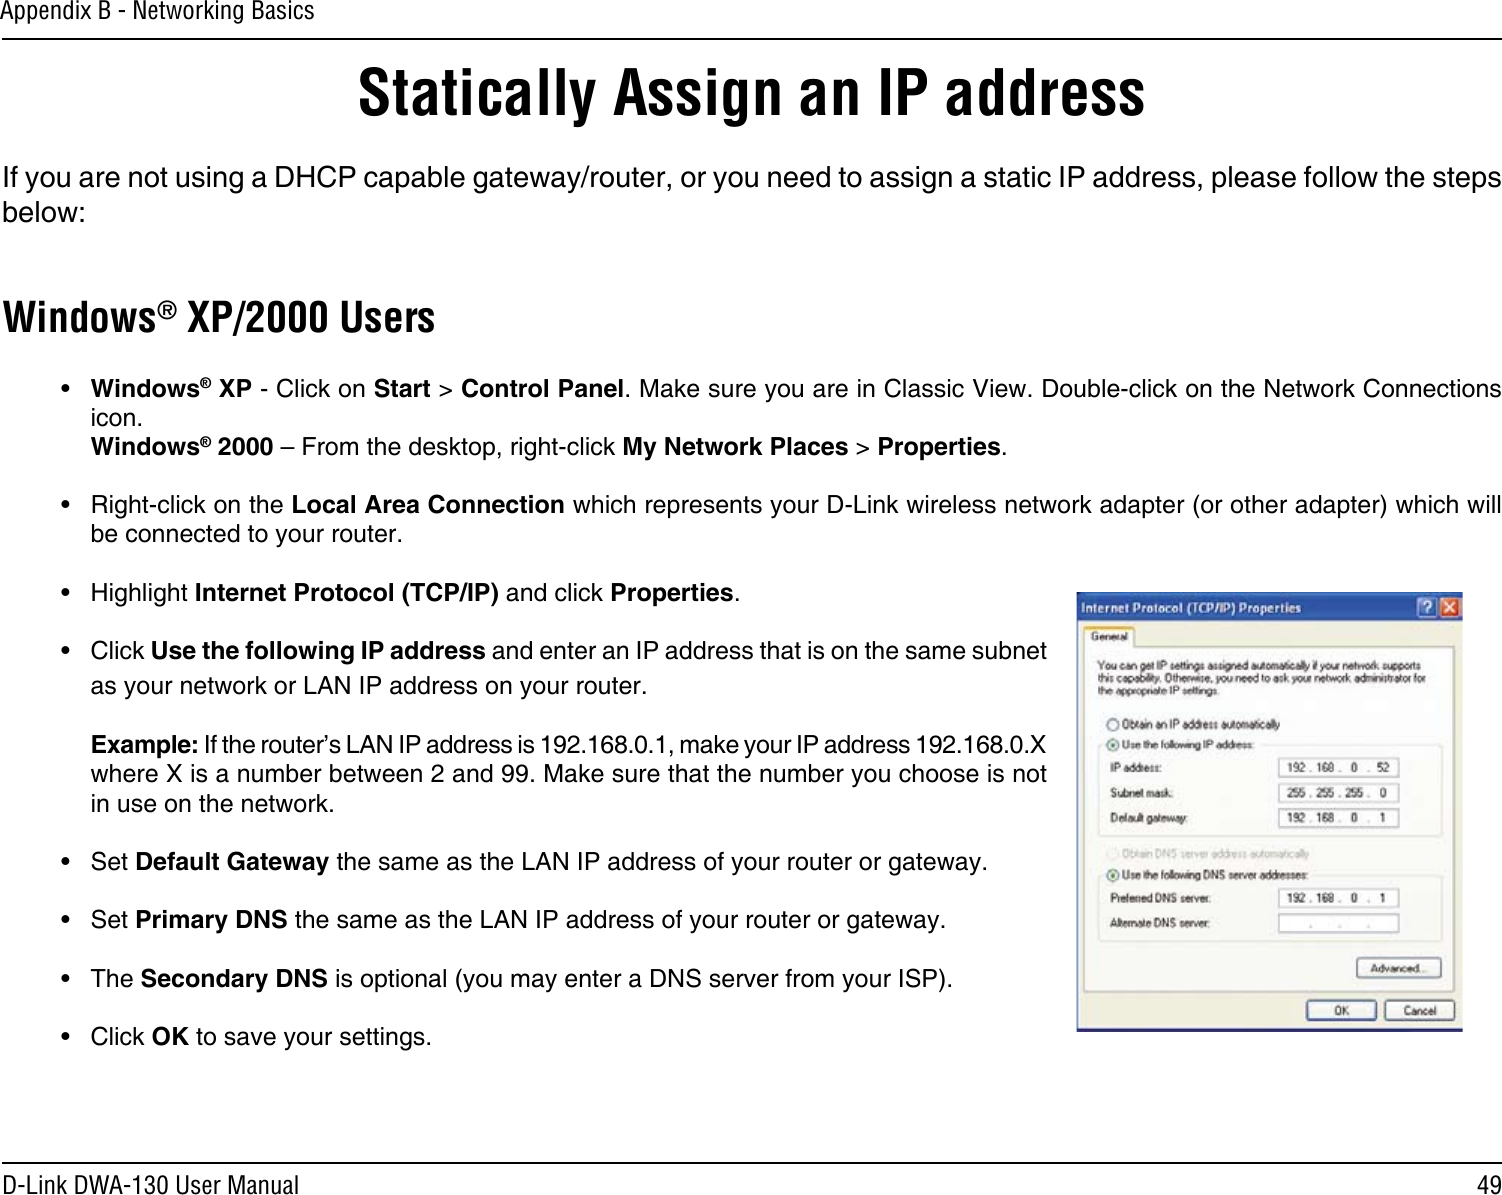 49D-Link DWA-130 User ManualAppendix B - Networking BasicsStatically Assign an IP addressIf you are not using a DHCP capable gateway/router, or you need to assign a static IP address, please follow the steps below:Windows® XP/2000 Users•  Windows® XP - Click on Start &gt; Control Panel. Make sure you are in Classic View. Double-click on the Network Connections icon. Windows® 2000 – From the desktop, right-click My Network Places &gt; Properties.•  Right-click on the Local Area Connection which represents your D-Link wireless network adapter (or other adapter) which will be connected to your router.•  Highlight Internet Protocol (TCP/IP) and click Properties.•  Click Use the following IP address and enter an IP address that is on the same subnet as your network or LAN IP address on your router. Example: If the router’s LAN IP address is 192.168.0.1, make your IP address 192.168.0.X where X is a number between 2 and 99. Make sure that the number you choose is not in use on the network. •  Set Default Gateway the same as the LAN IP address of your router or gateway.•  Set Primary DNS the same as the LAN IP address of your router or gateway. •  The Secondary DNS is optional (you may enter a DNS server from your ISP).•  Click OK to save your settings.